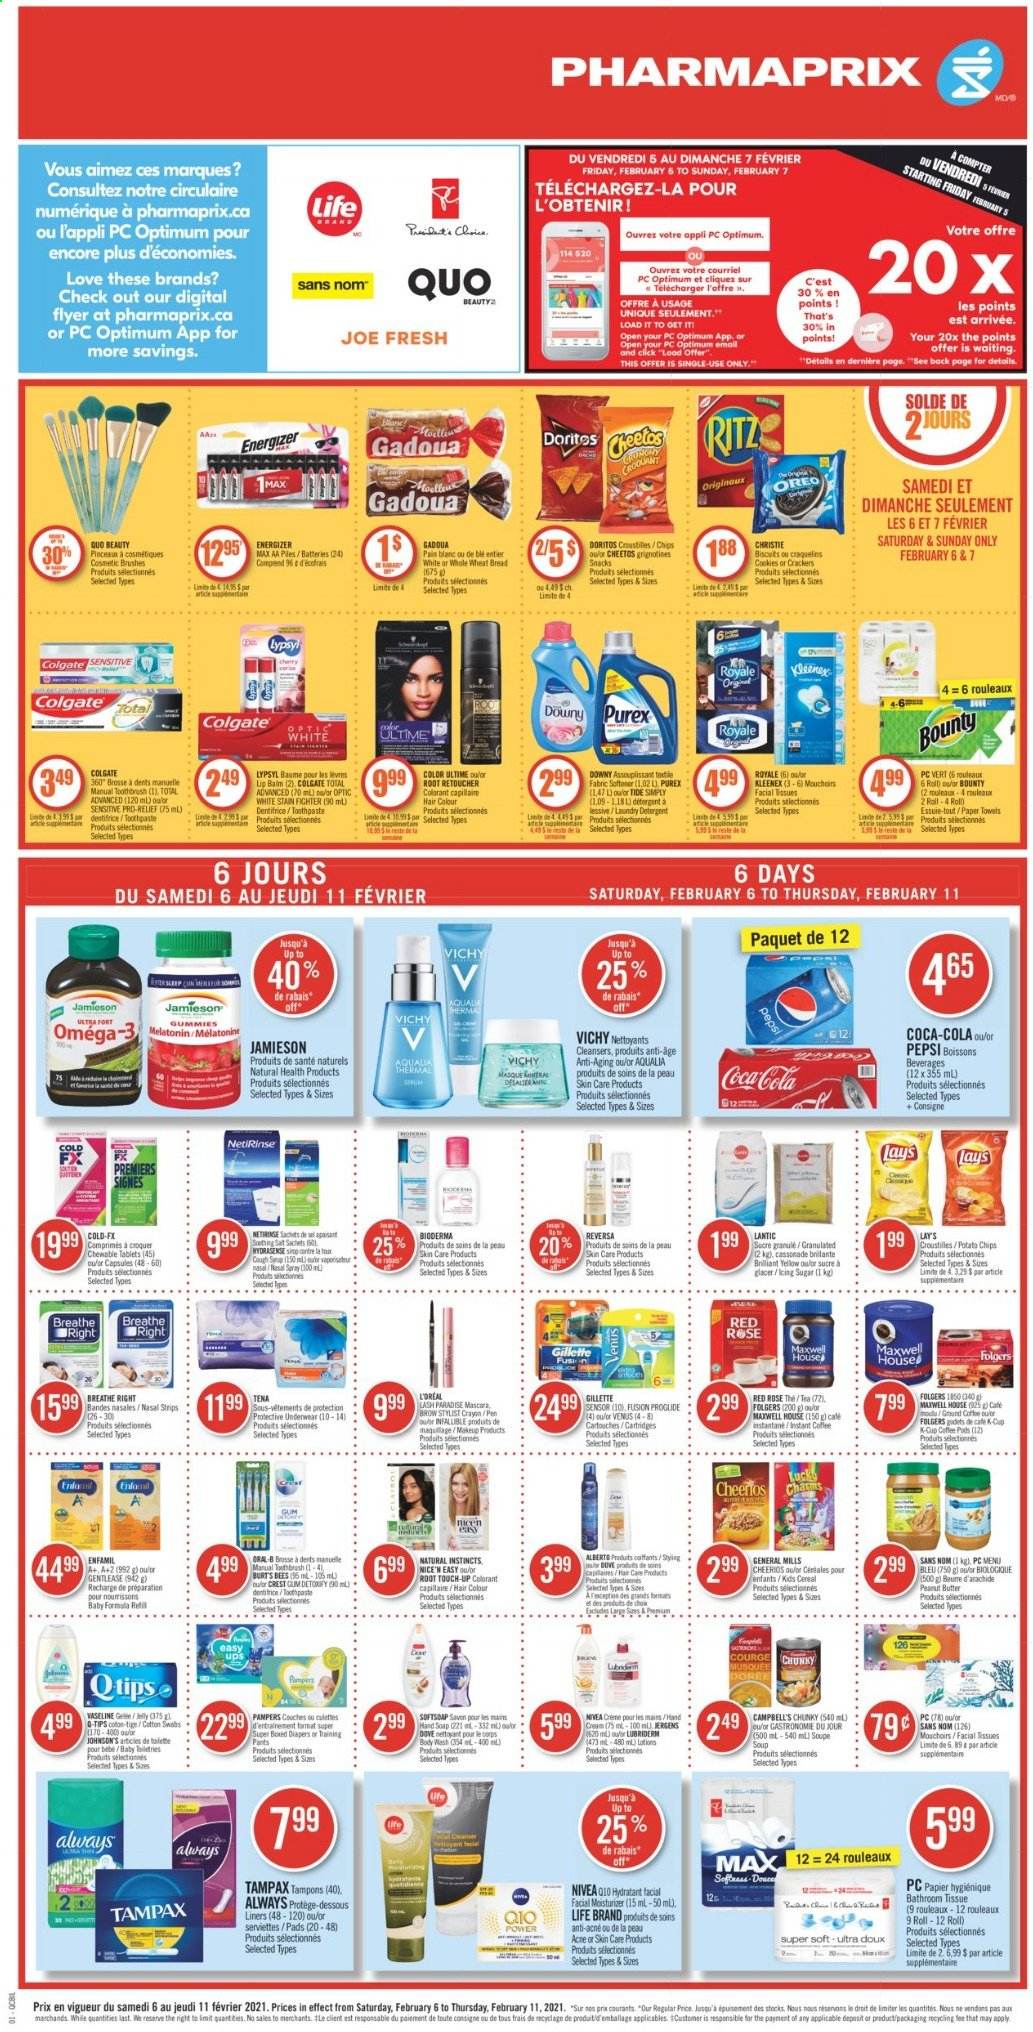 thumbnail - Pharmaprix Flyer - February 06, 2021 - February 11, 2021 - Sales products - wheat bread, Ace, Campbell's, soup, cookies, snack, Bounty, jelly, crackers, biscuit, RITZ, Doritos, potato chips, Cheetos, Lay’s, sugar, icing sugar, cereals, Cheerios, peanut butter, Coca-Cola, Pepsi, Maxwell House, tea, Folgers, rosé wine, Enfamil, pants, nappies, Johnson's, baby pants, bath tissue, Kleenex, kitchen towels, paper towels, Tide, fabric softener, laundry detergent, Purex, body wash, Vichy, hand soap, Vaseline, soap, toothbrush, toothpaste, Crest, tampons, facial tissues, L’Oréal, moisturizer, serum, Root Touch-Up, hair color, Lubriderm, hand cream, Venus, makeup, cup, pen, battery, rose, Melatonin, Omega-3, Oreo, Gillette, mascara, Tampax, Nivea, Oral-B, chips. Page 1.